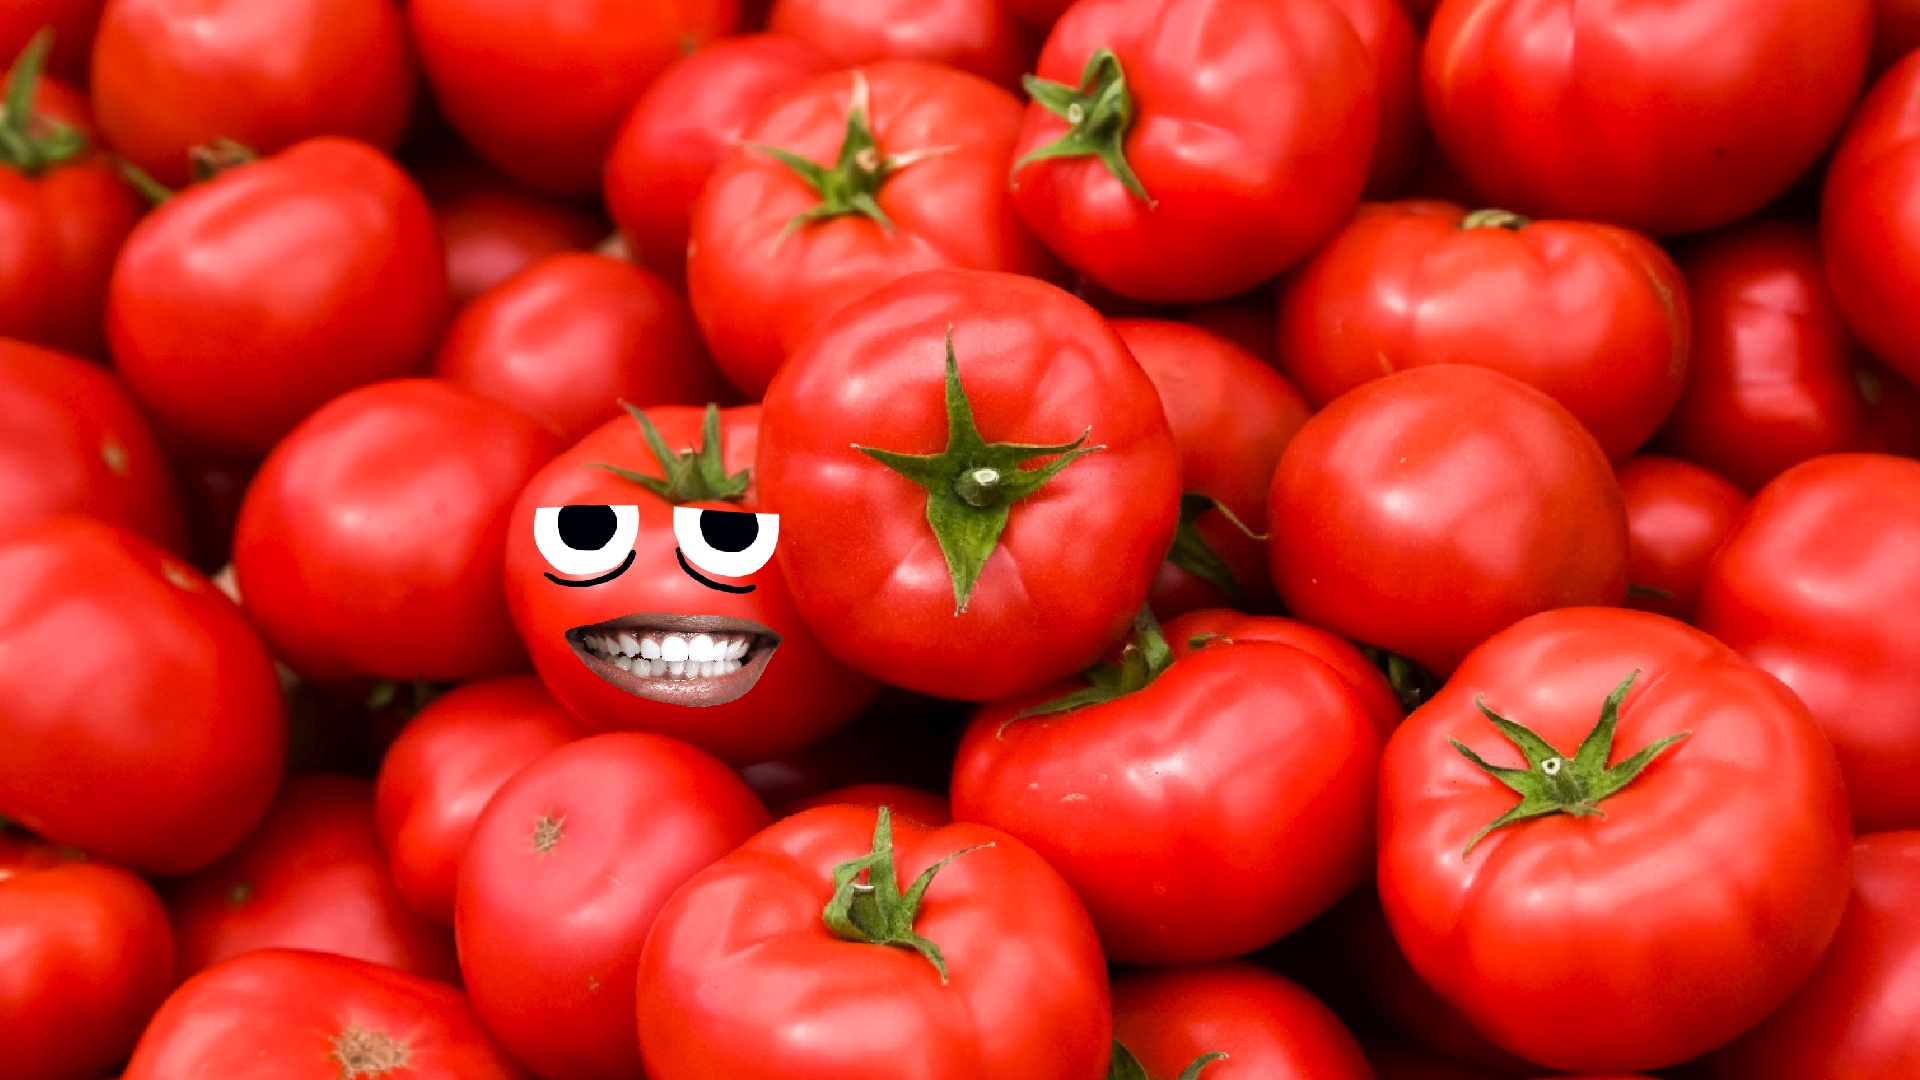 Some juicy tomatoes